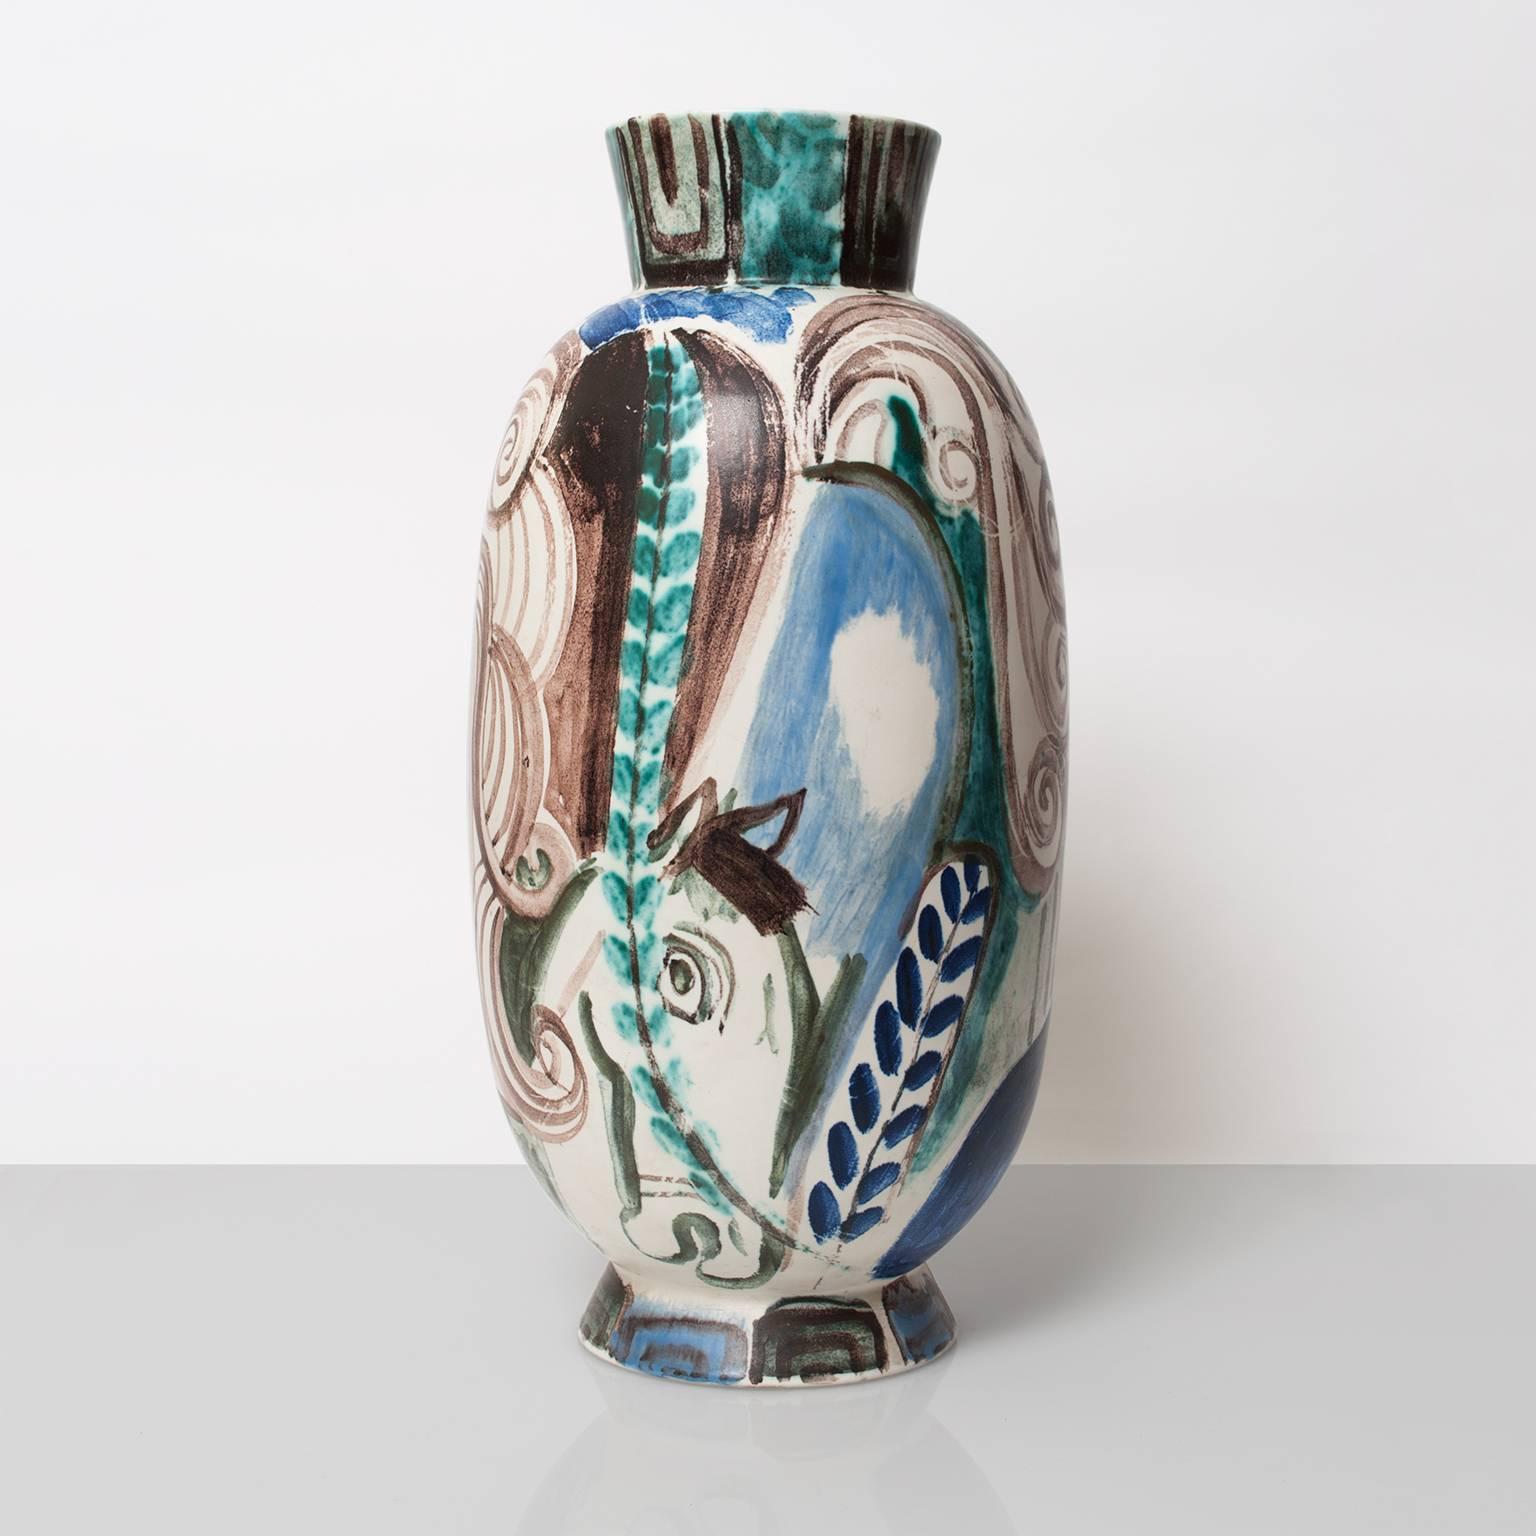 Large unique hand-painted ceramic vase by Carl Harry Stalhane for Rörstrand, Sweden, 1944 signed and dated.